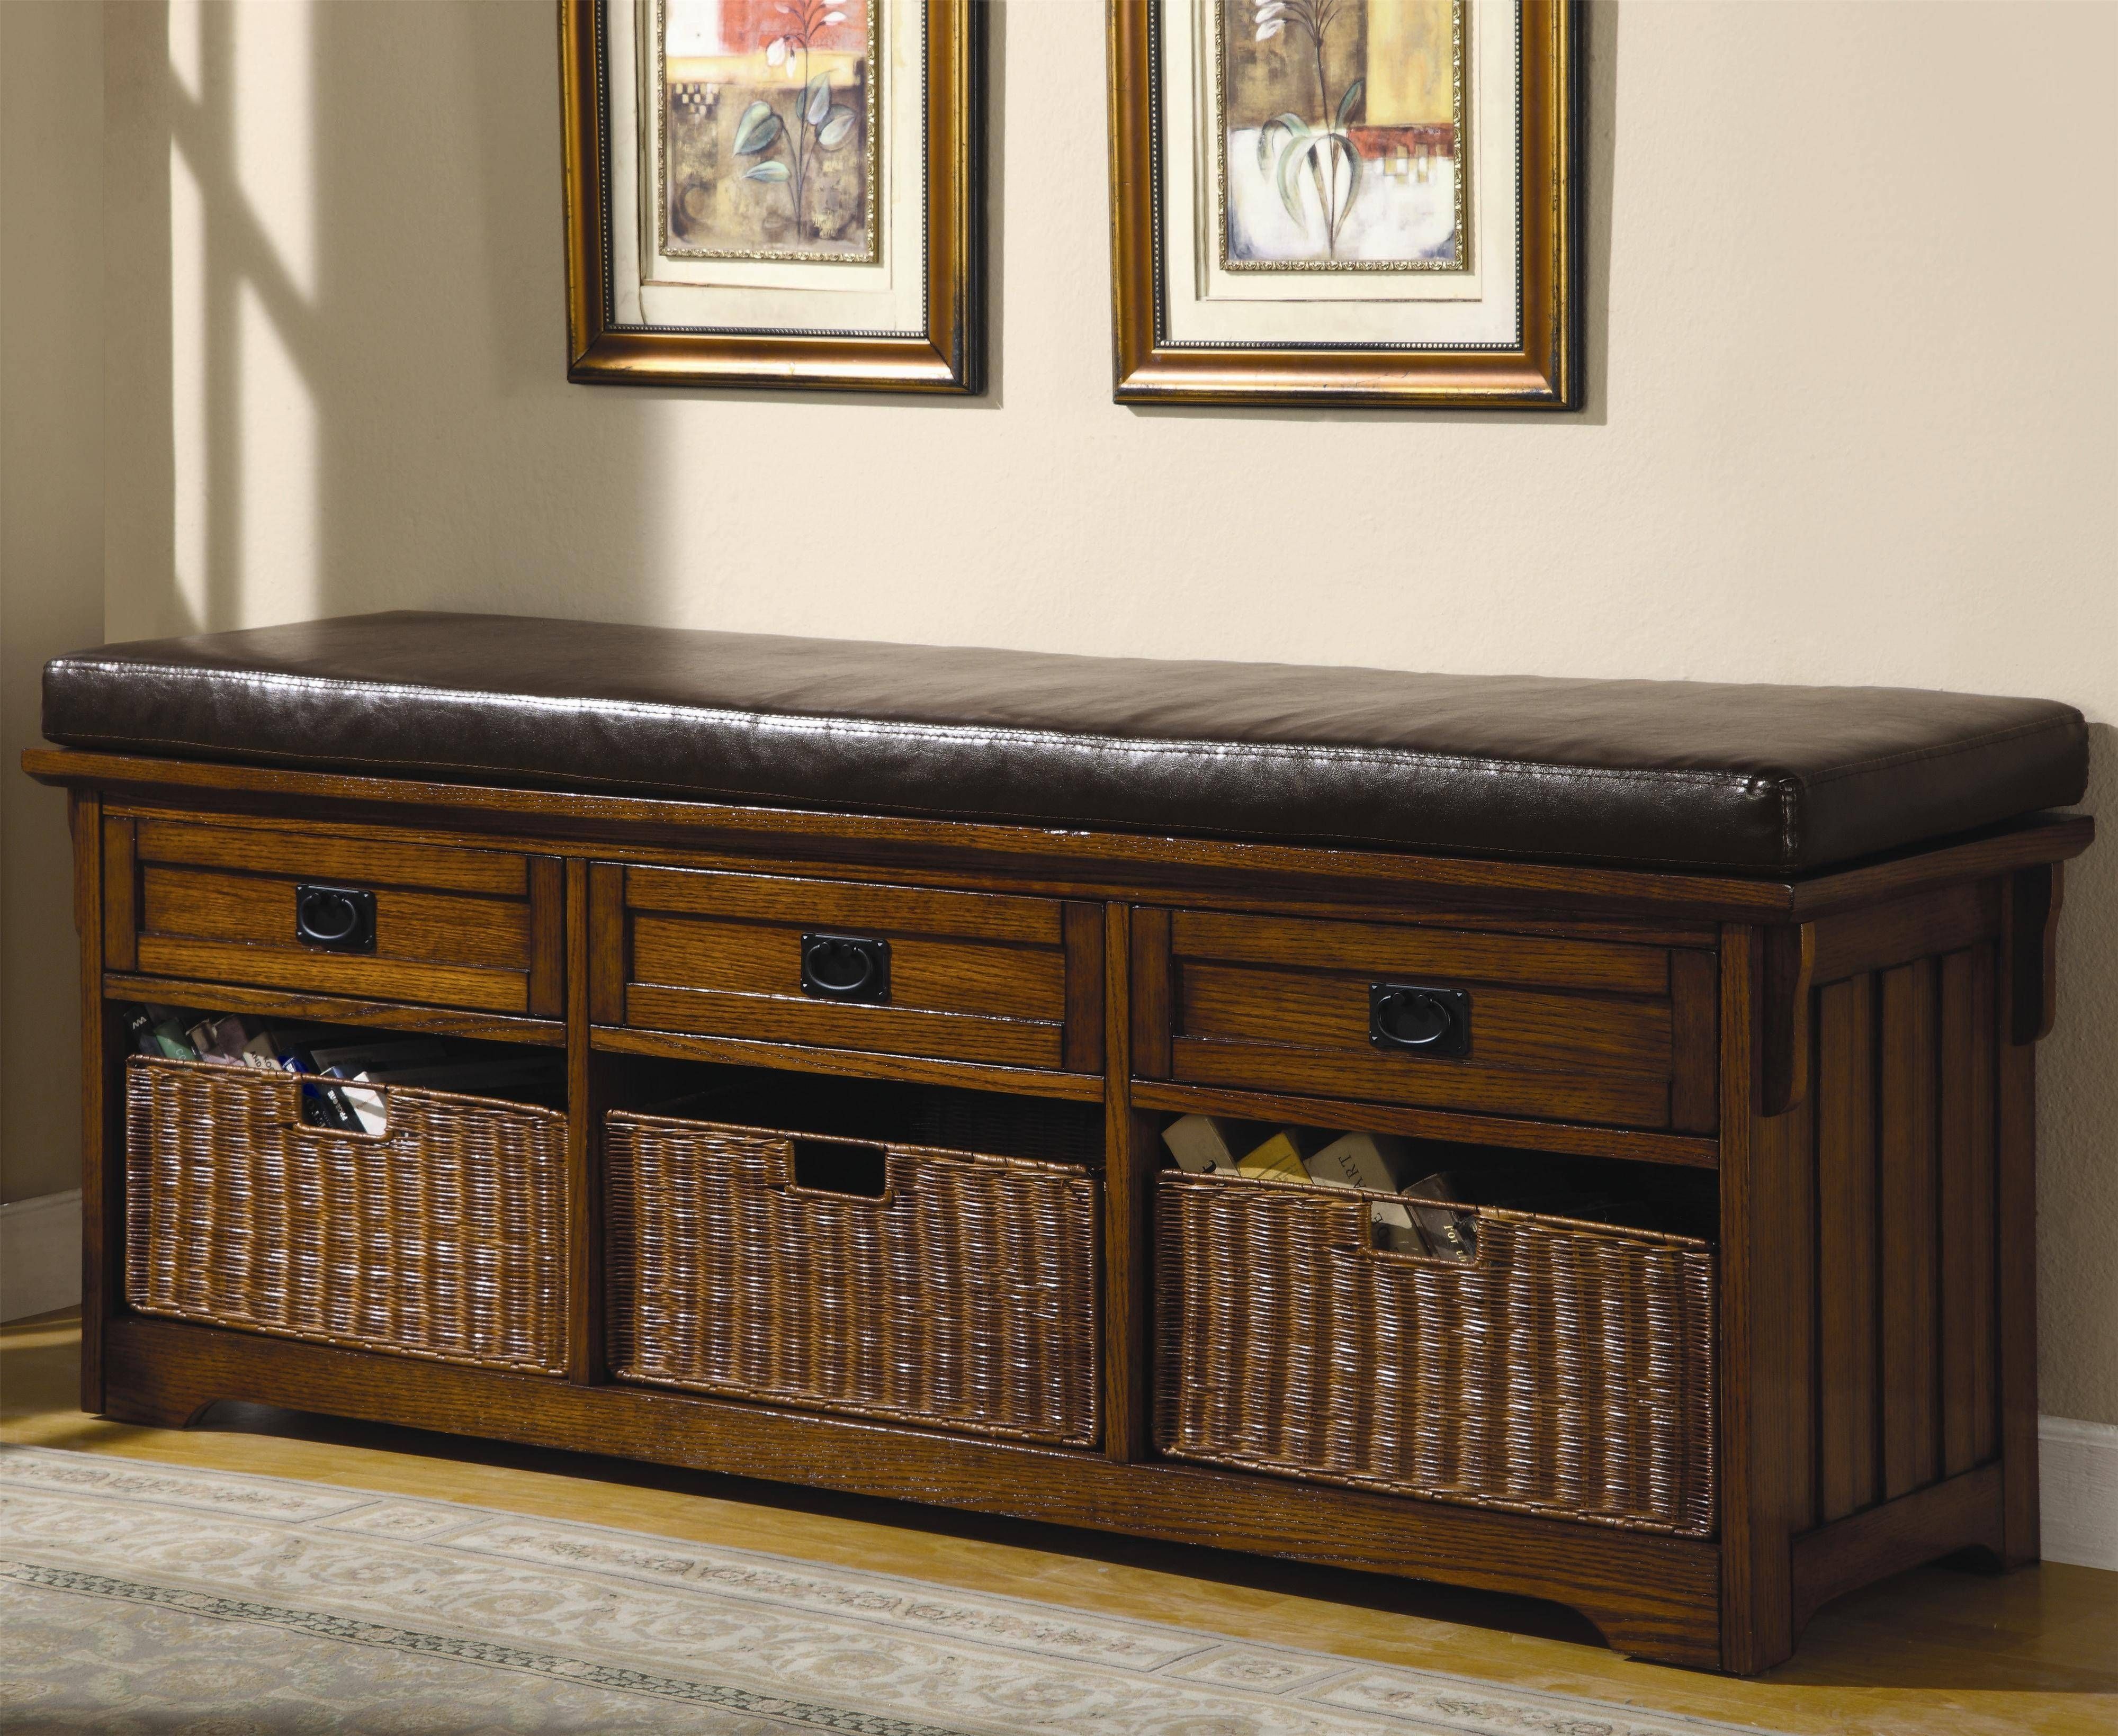 Benches Large Storage Bench With Baskets Lowest Price – Sofa For Tv Stands With Storage Baskets (View 12 of 15)